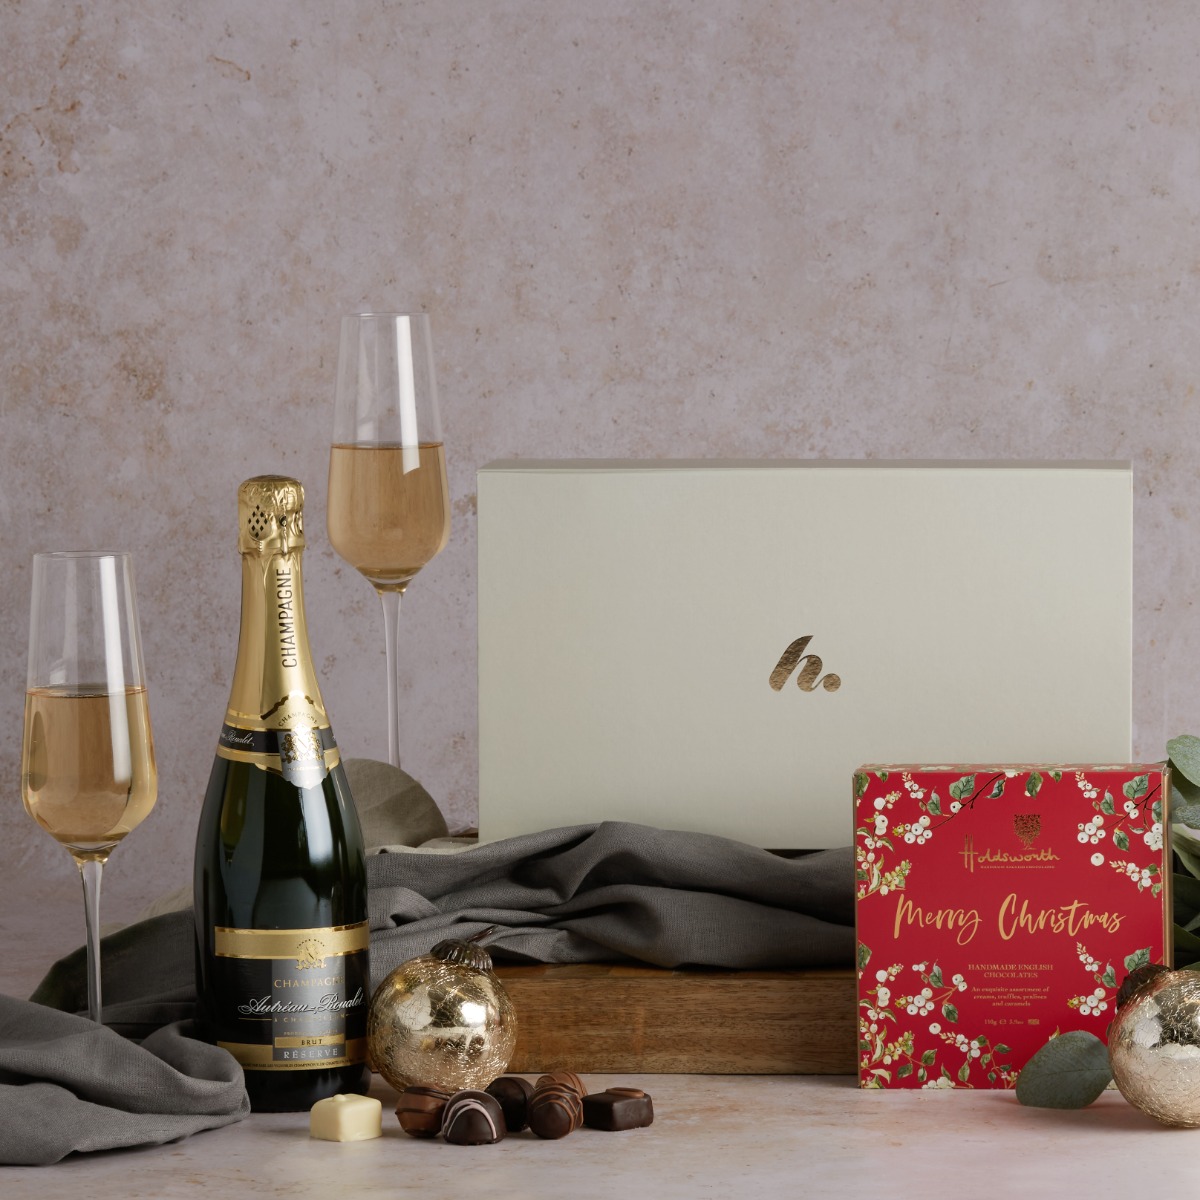 Champagne and Christmas Chocolates Hamper hampers.com Hampers.com